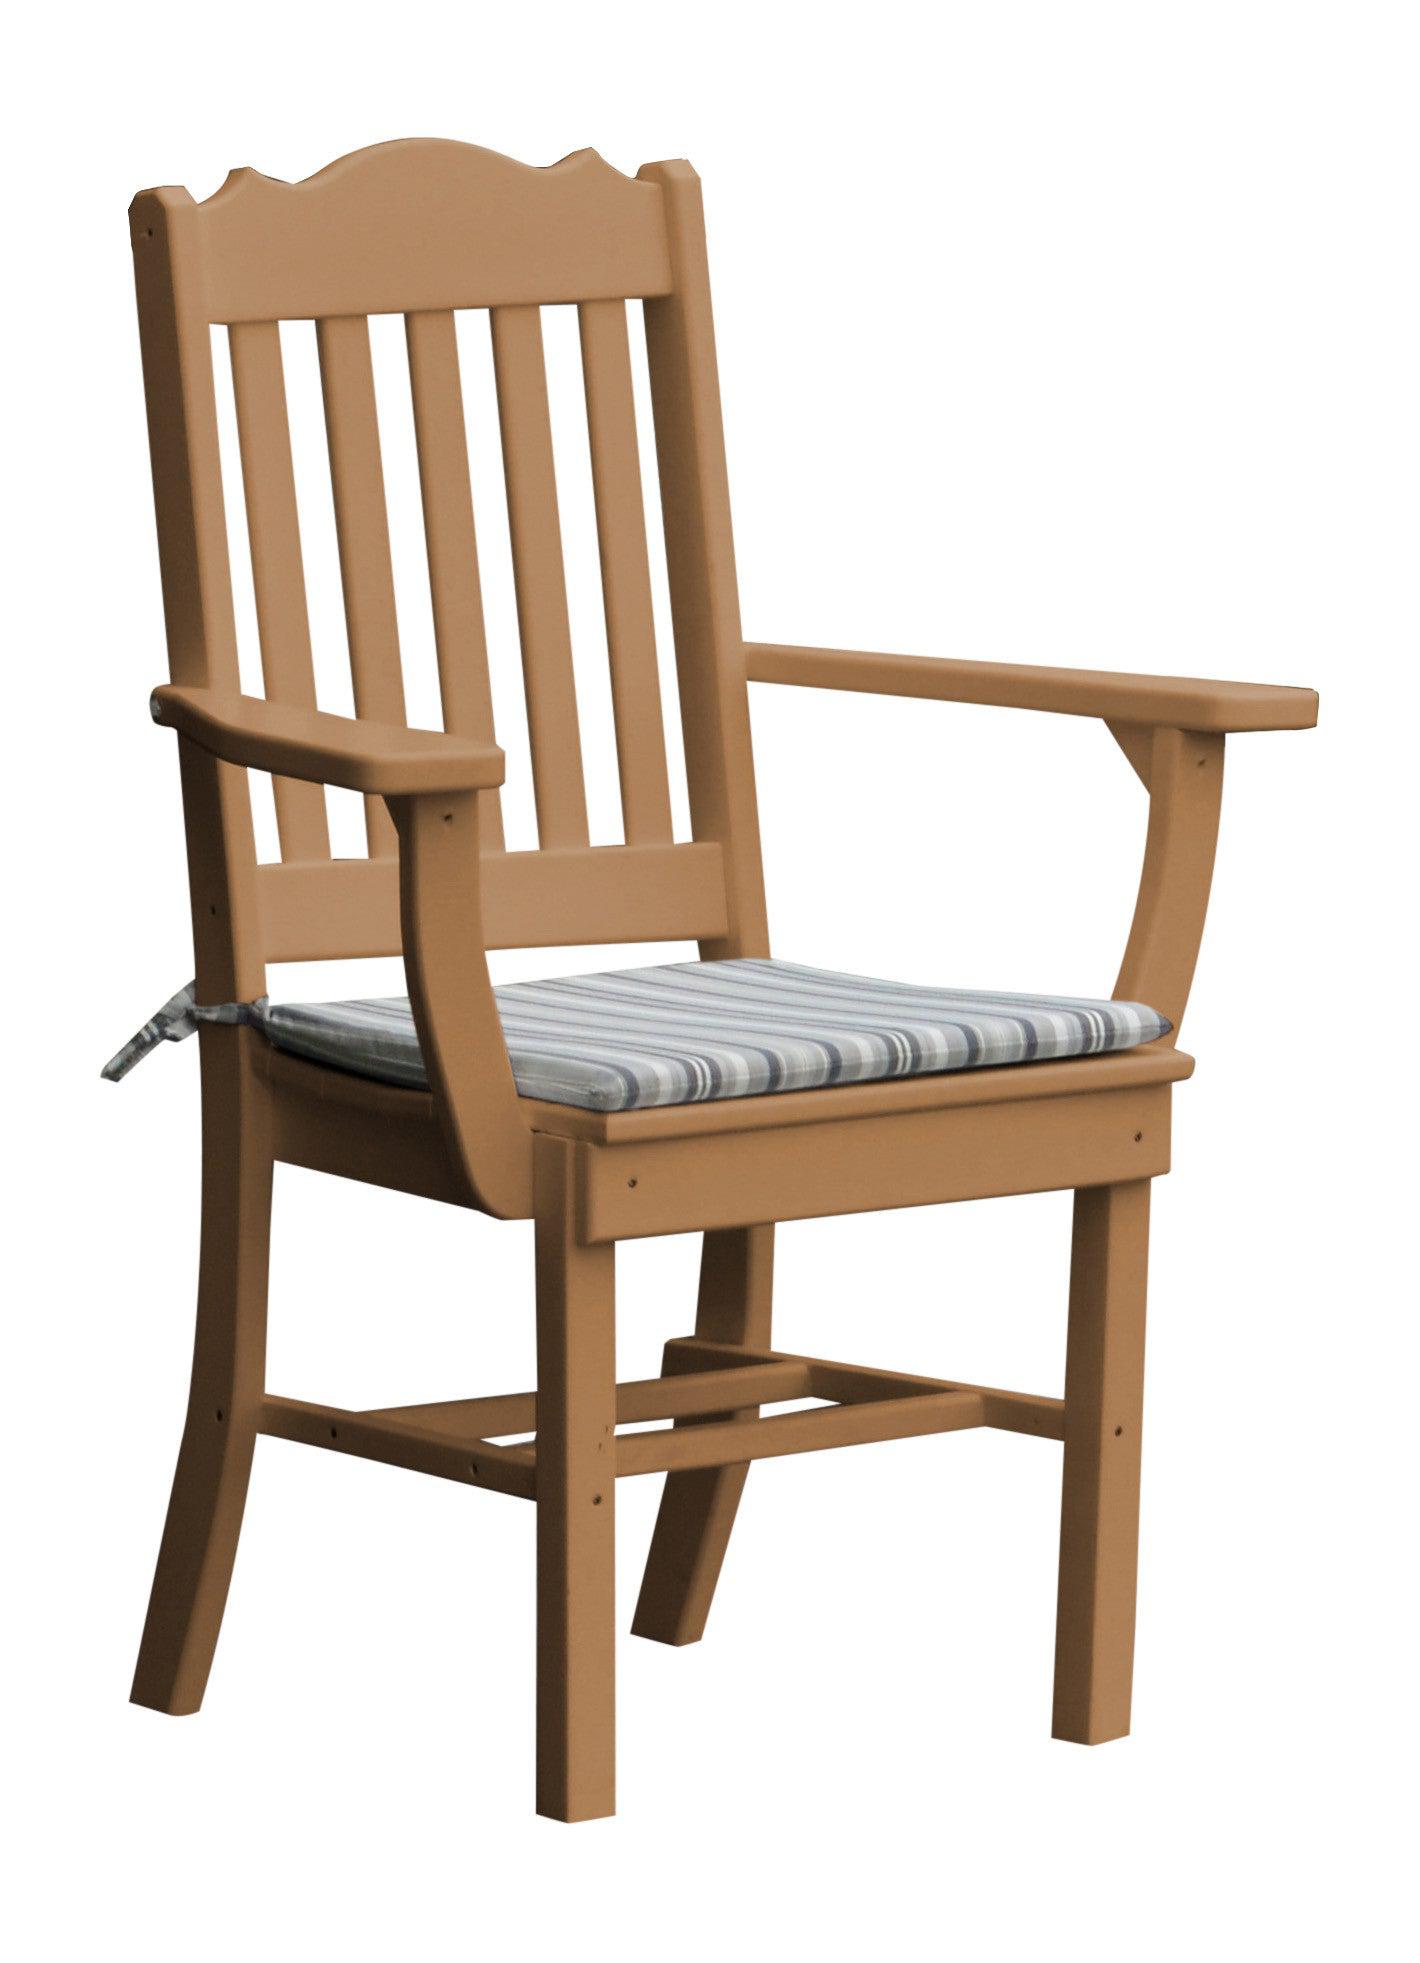 A&L Furniture Company Recycled Plastic Royal Dining Chair w/ Arms - Cedar